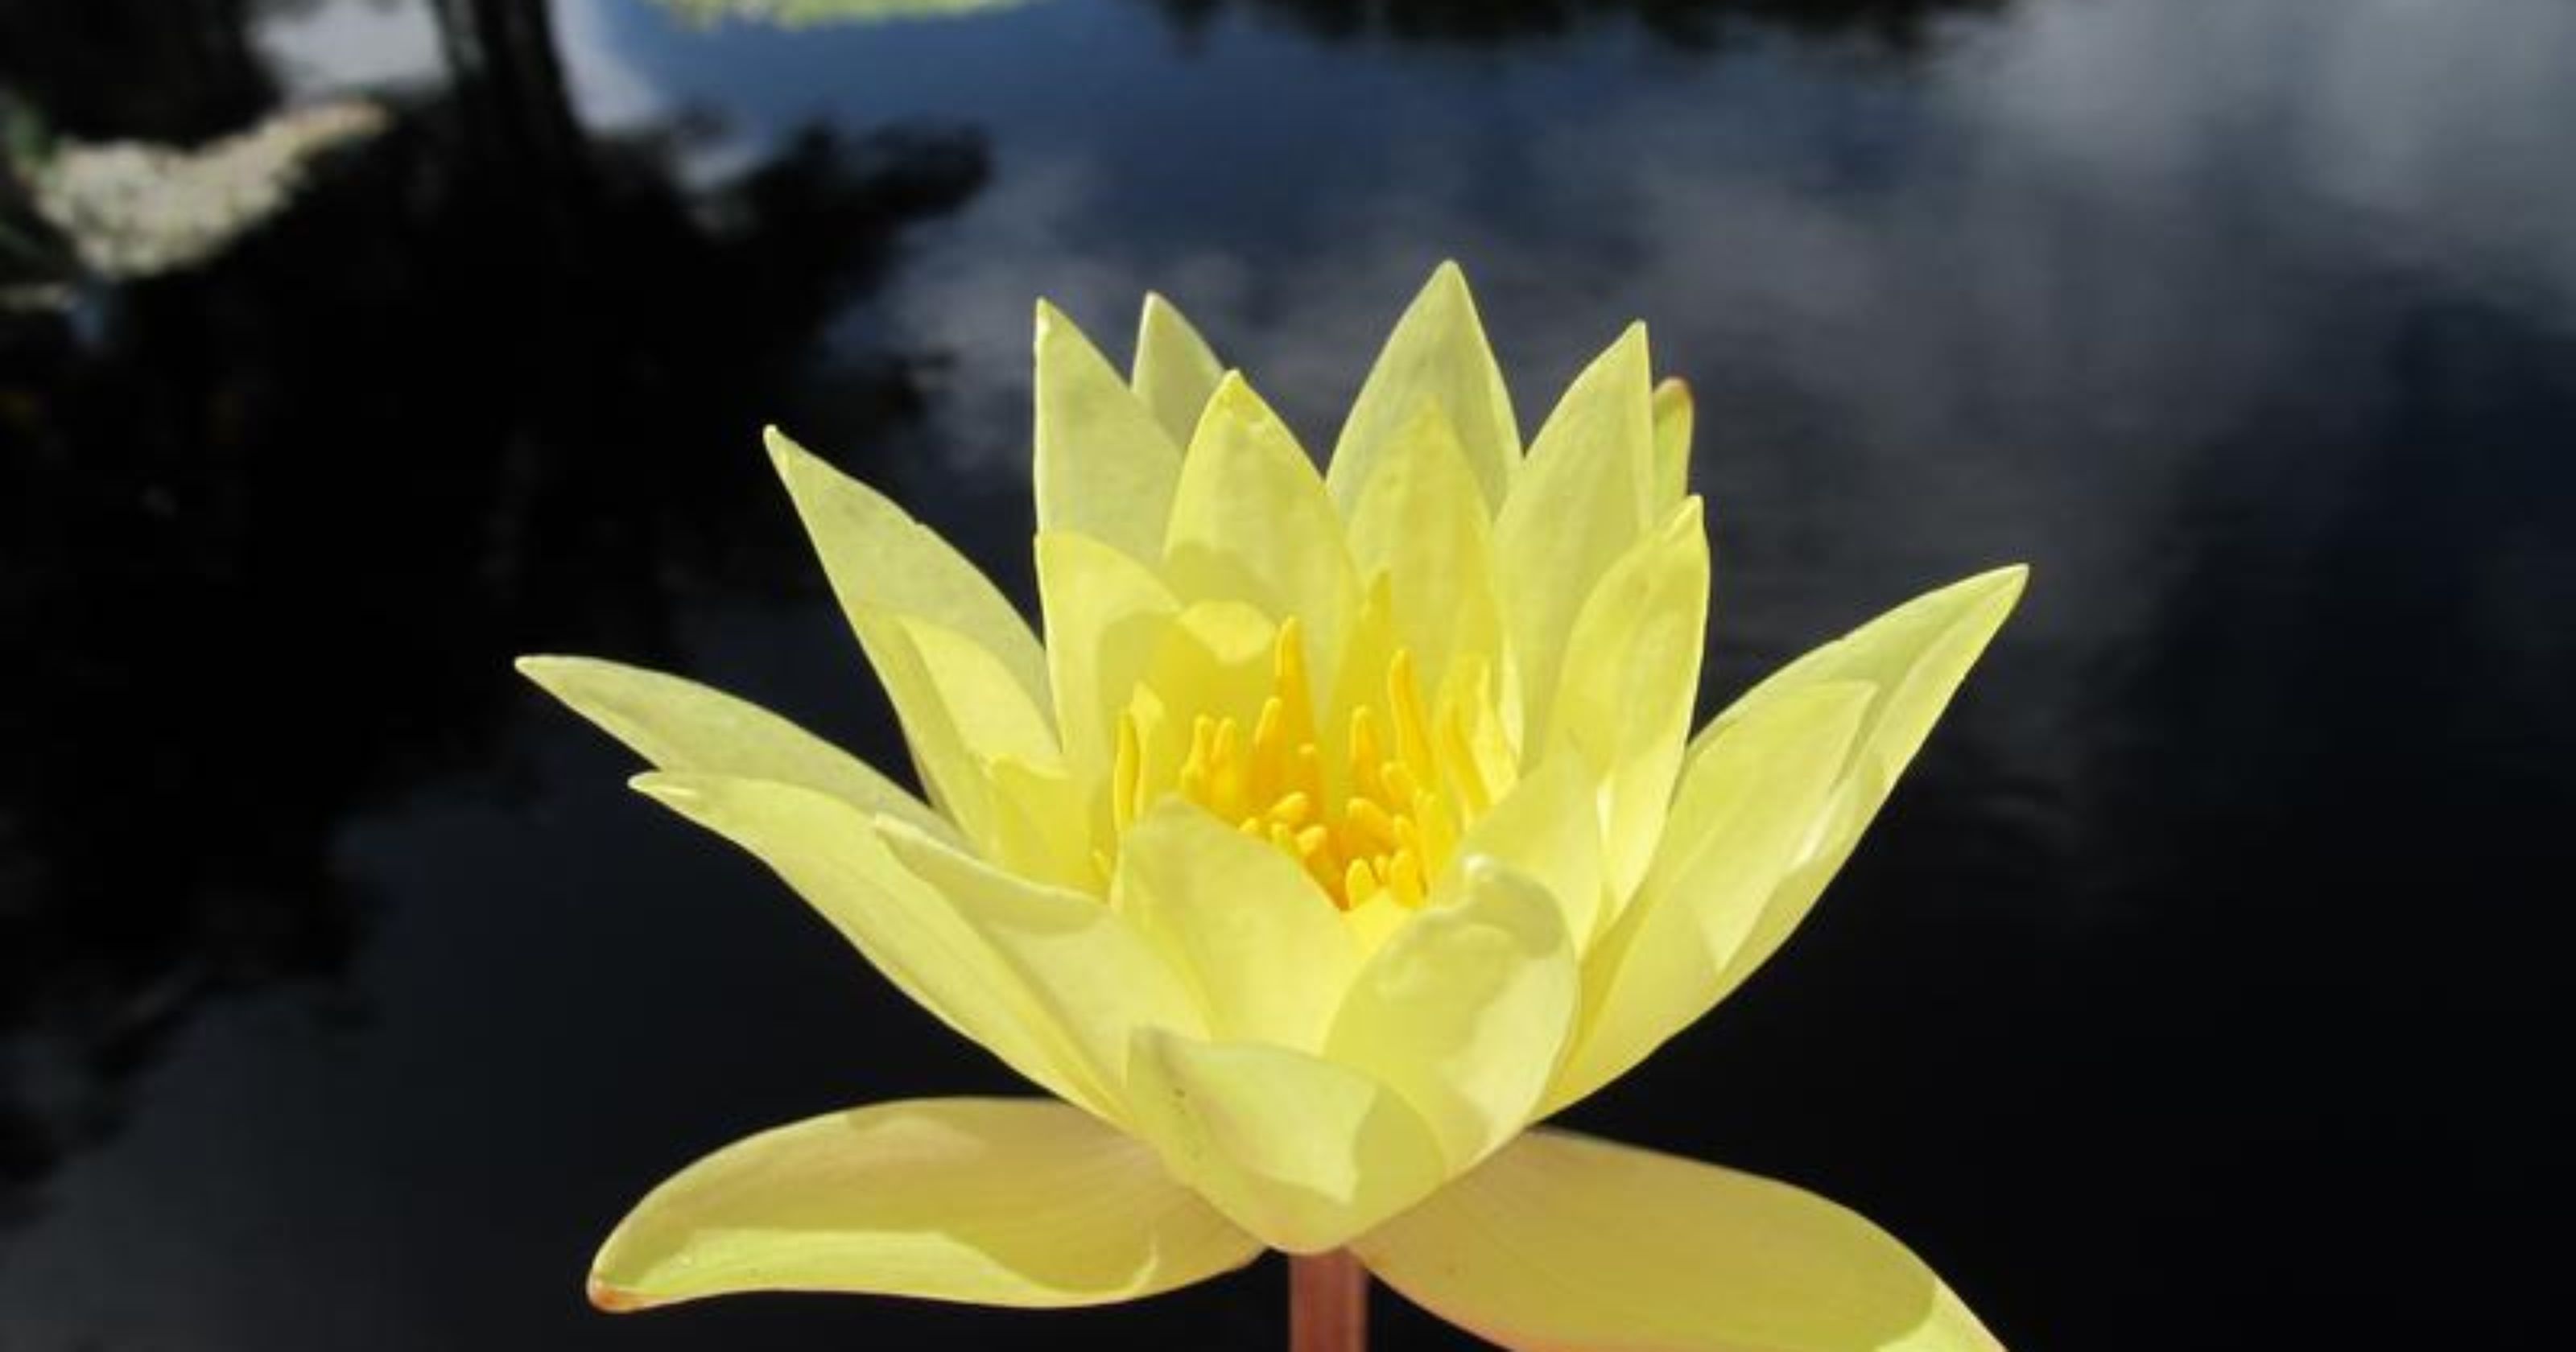 Meet the native yellow waterlily